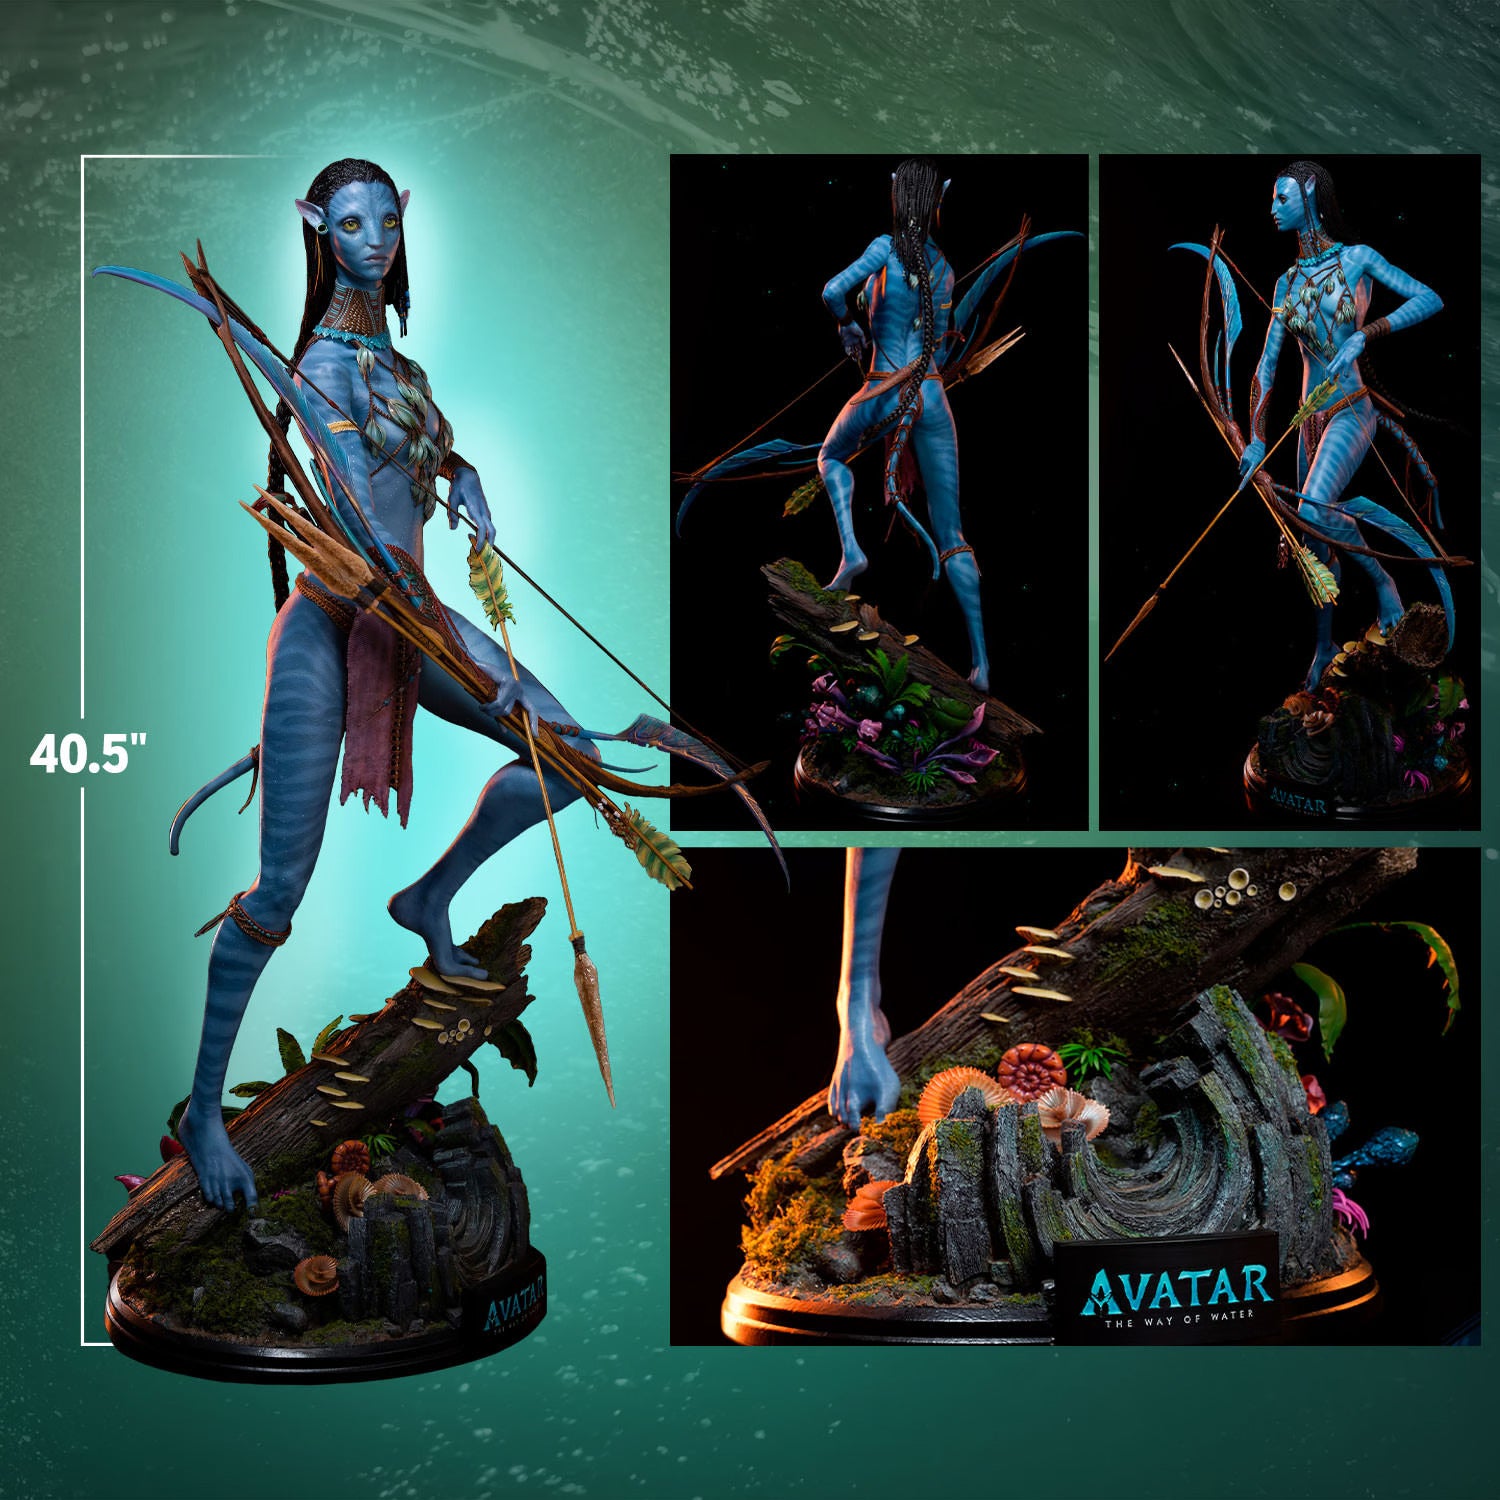 INFINITY STUDIO AVATAR 'THE WAY OF WATER' NEYTIRI 1/3 SCALE STATUE (PRE-ORDER) - Anotoys Collectibles